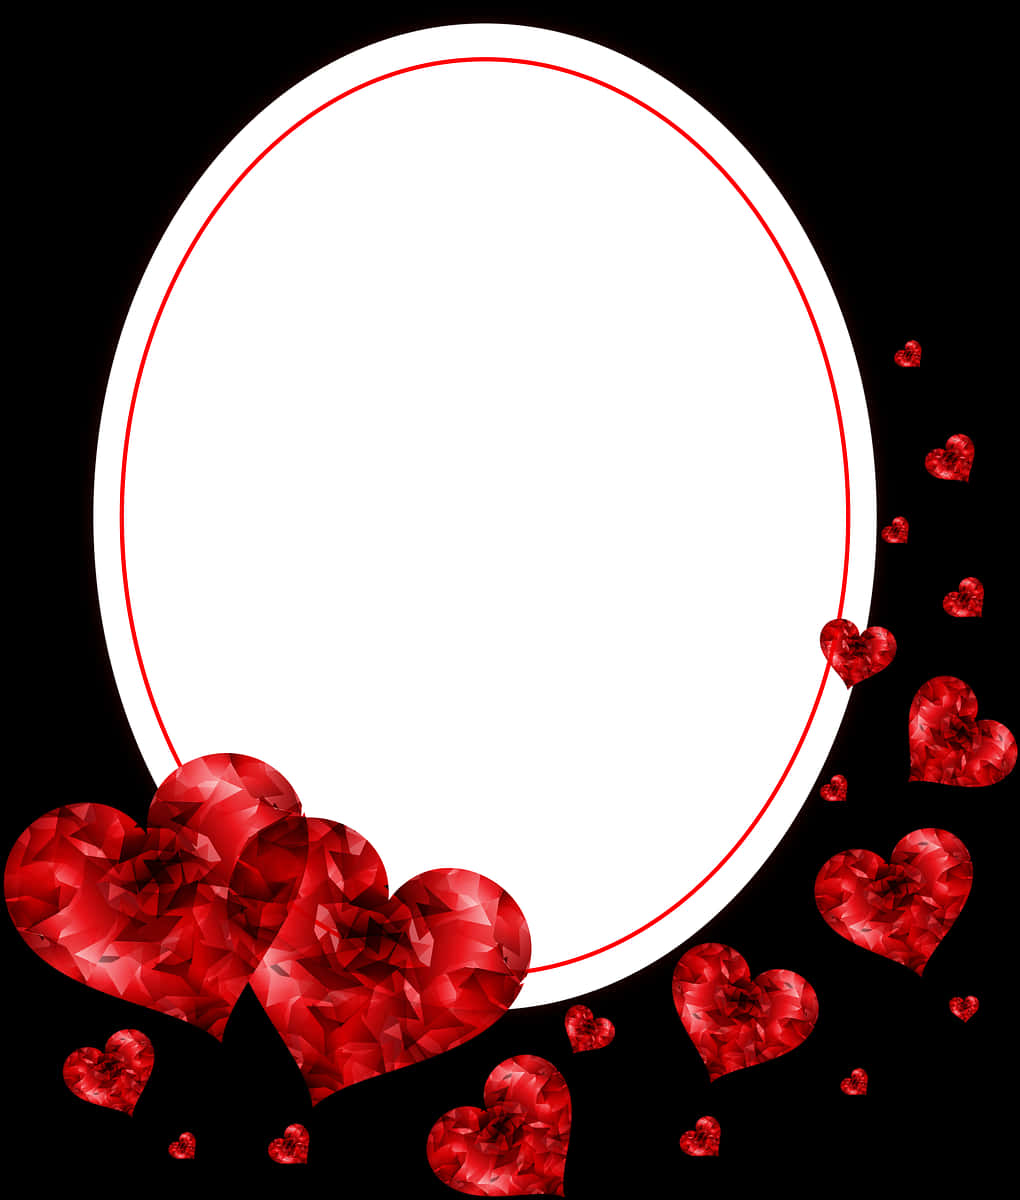 A White Oval Frame With Red Hearts